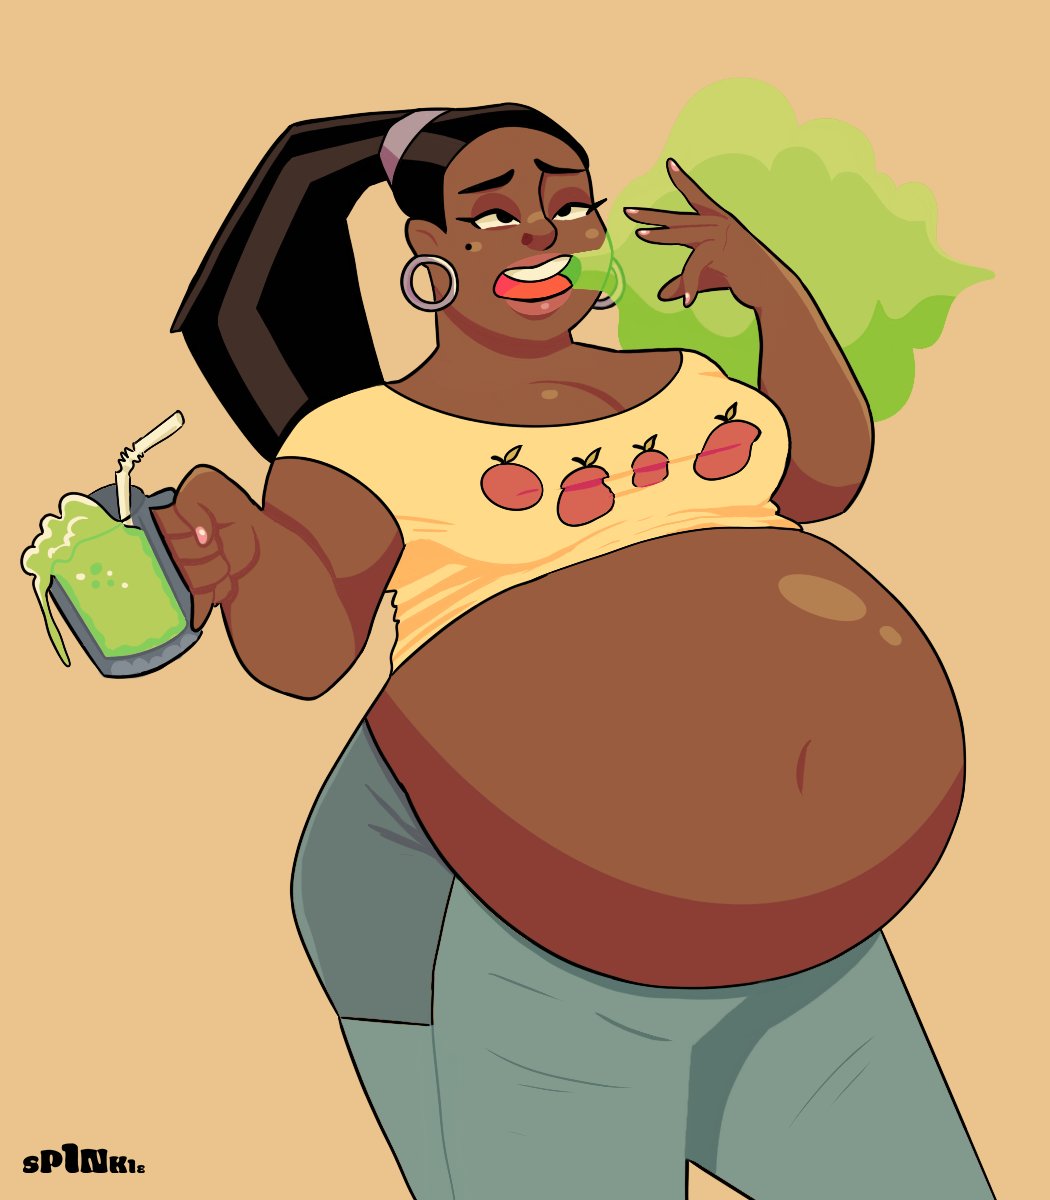 comm of leshawna taking an island smoothy challenge much too seriously (1 o...